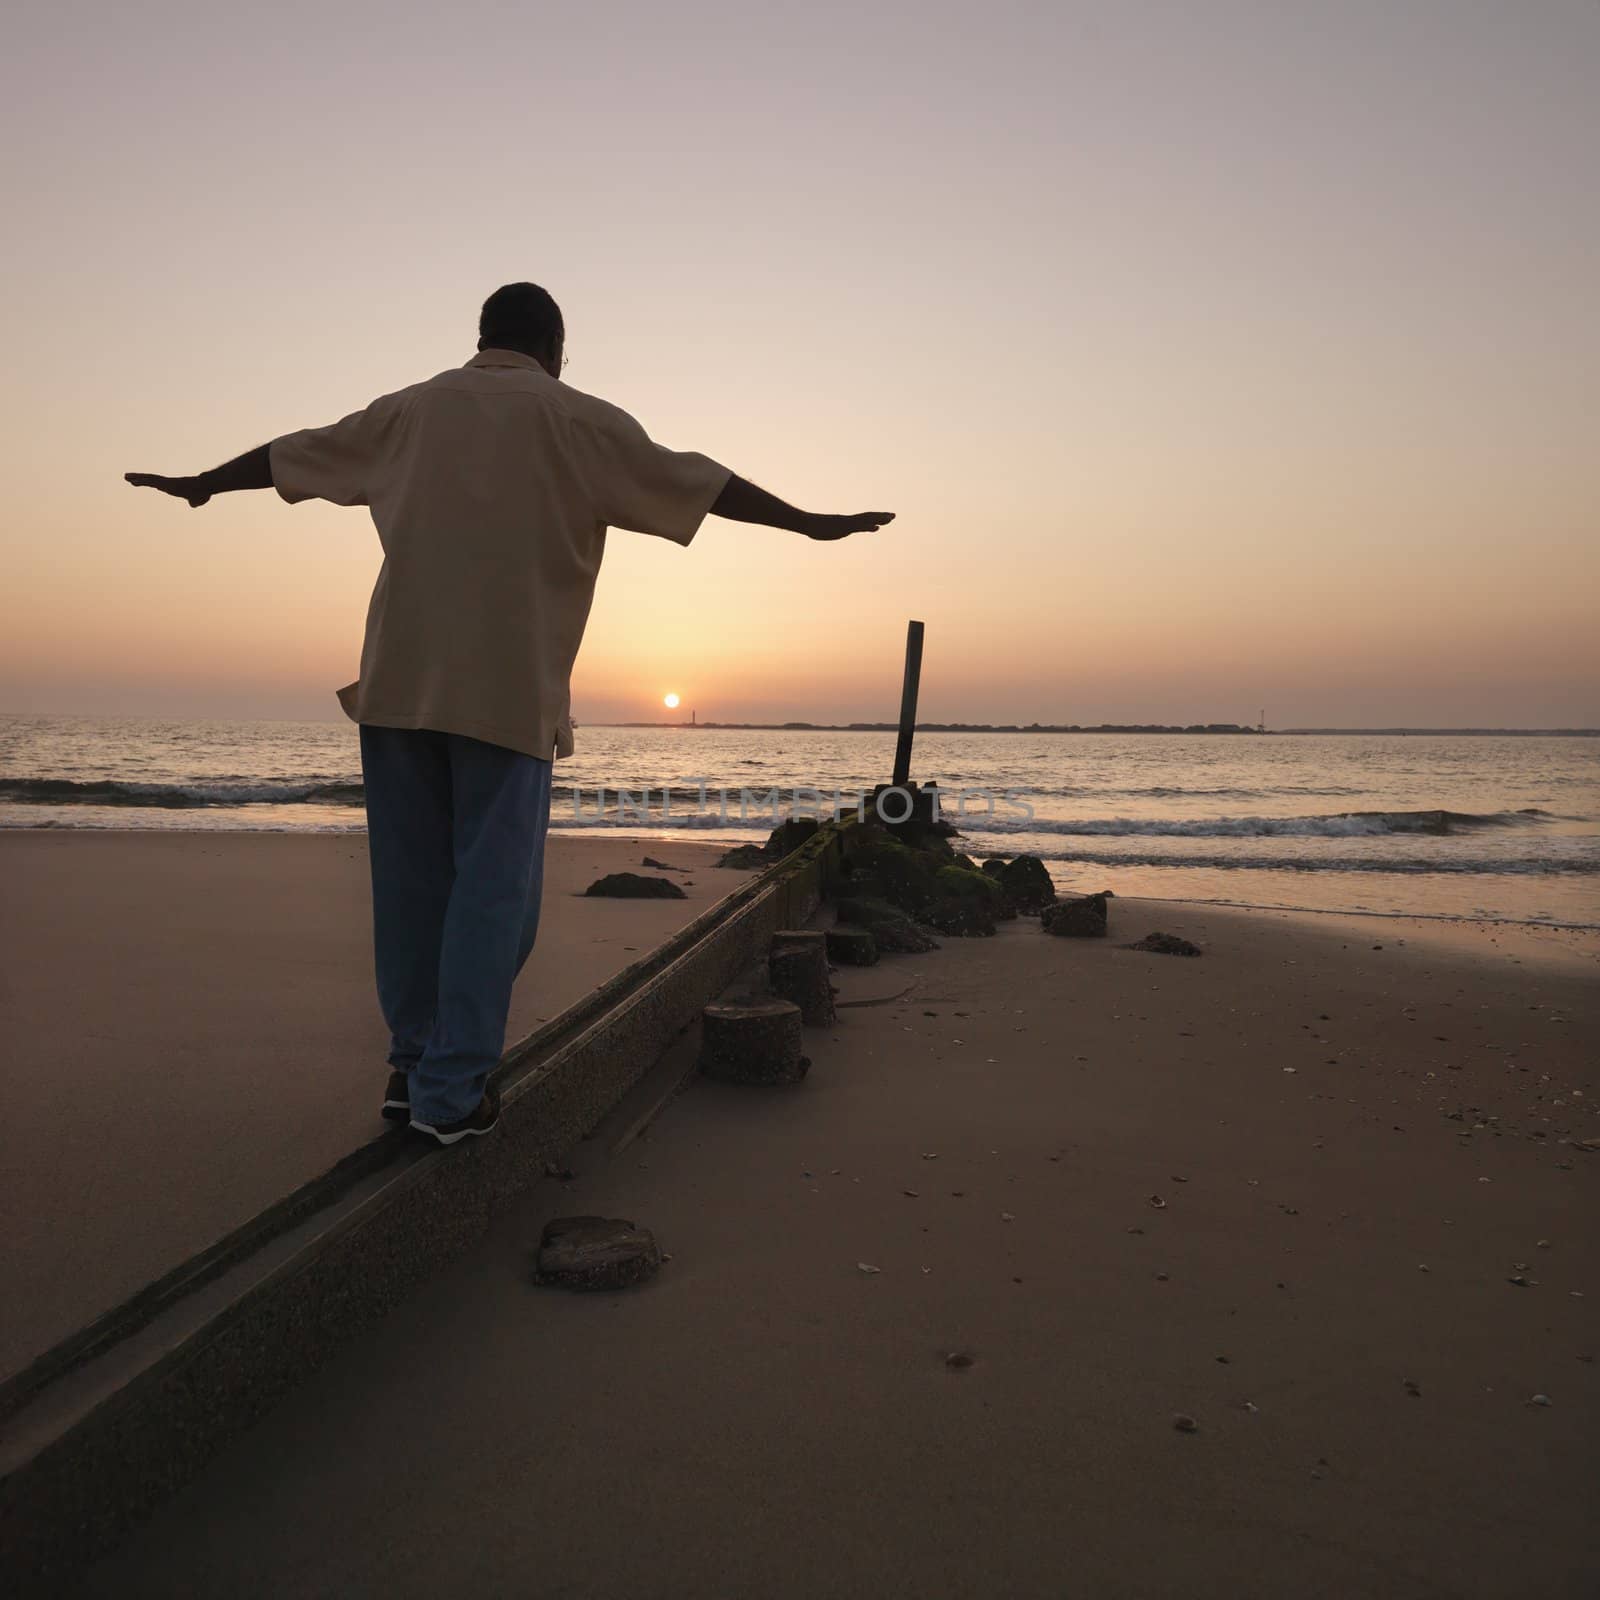 African American male balancing on beach erosion barrier at beach during sunset